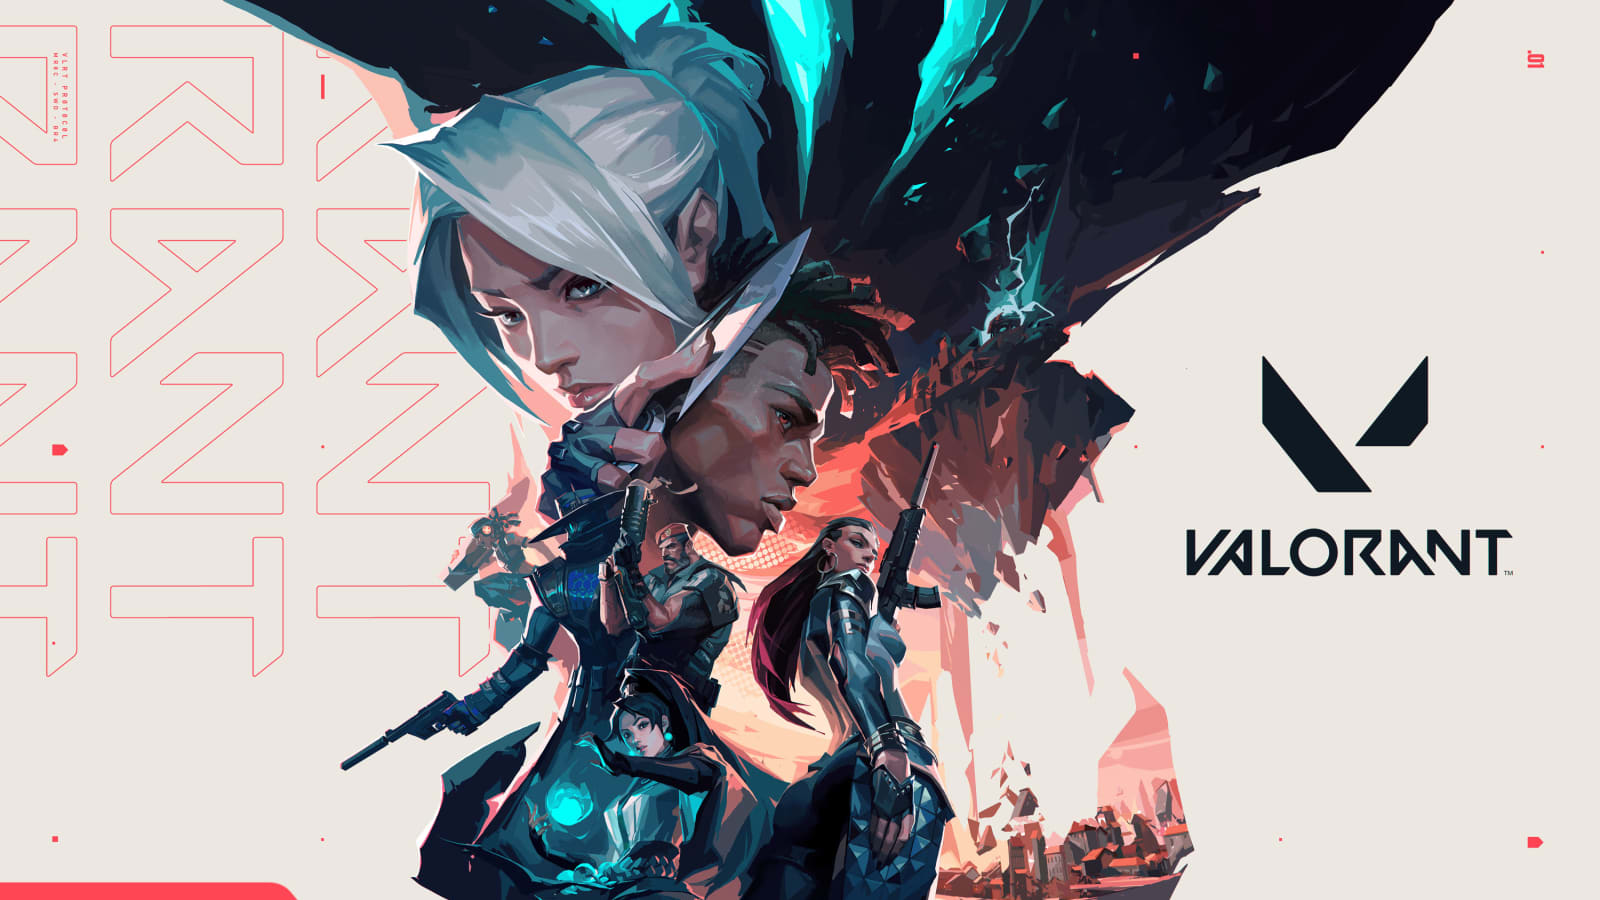 July 2021 Prime Gaming Stars Exclusive Content for Valorant, and 5 Games